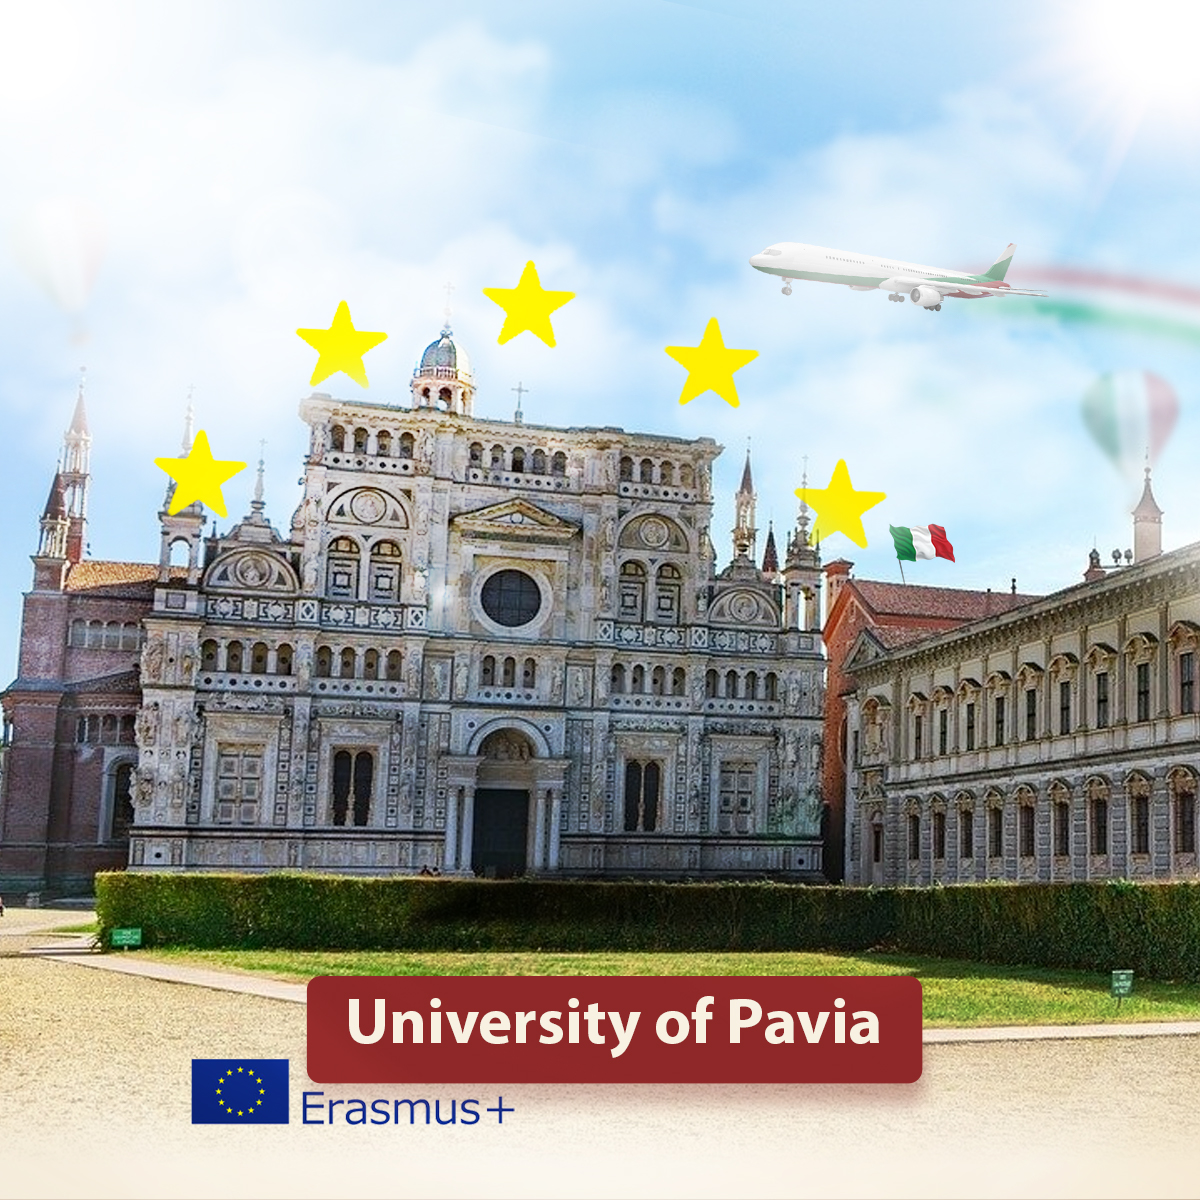 /En/Announcements/PublishingImages/Erasmus+%20Scholarships%20for%20UOP%20Students%20at%20University%20of%20Pavia%20and%20Tuscia%